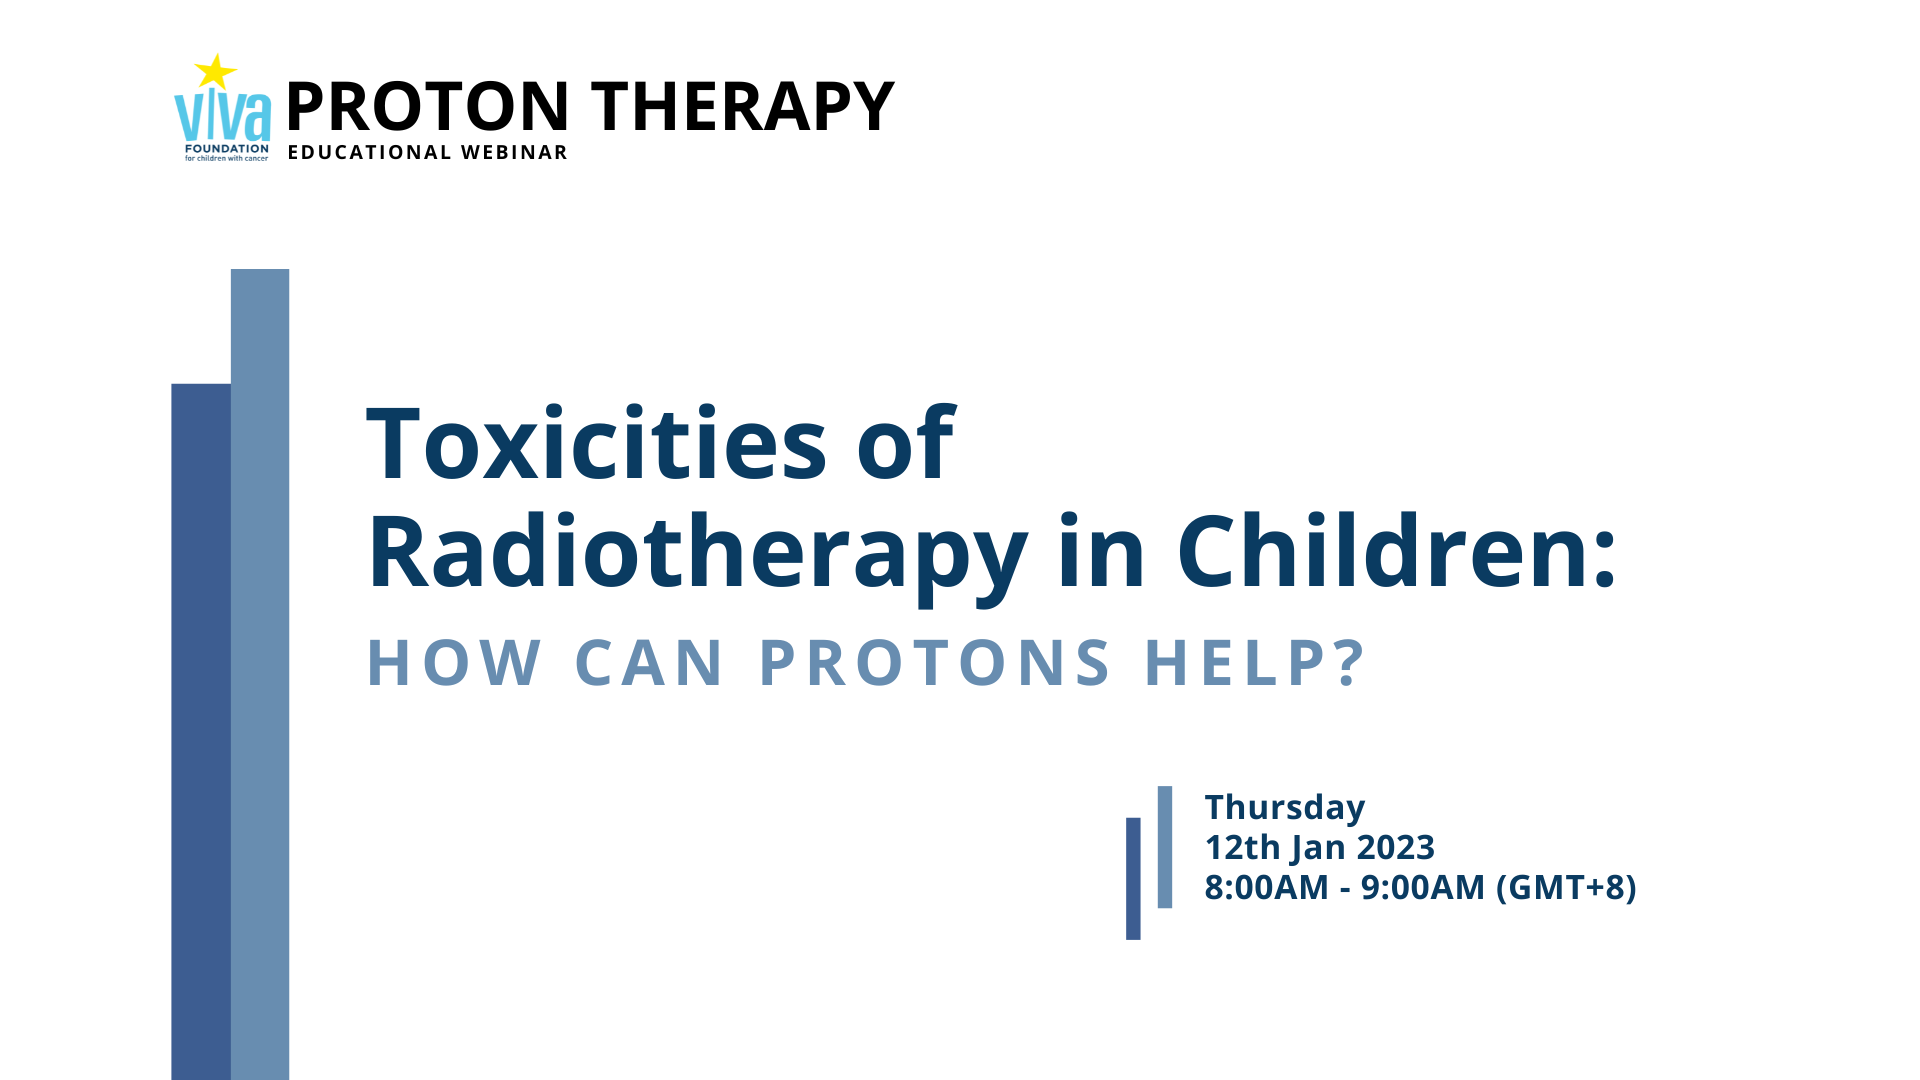 Toxicities of Radiotherapy in Children: How can protons help?